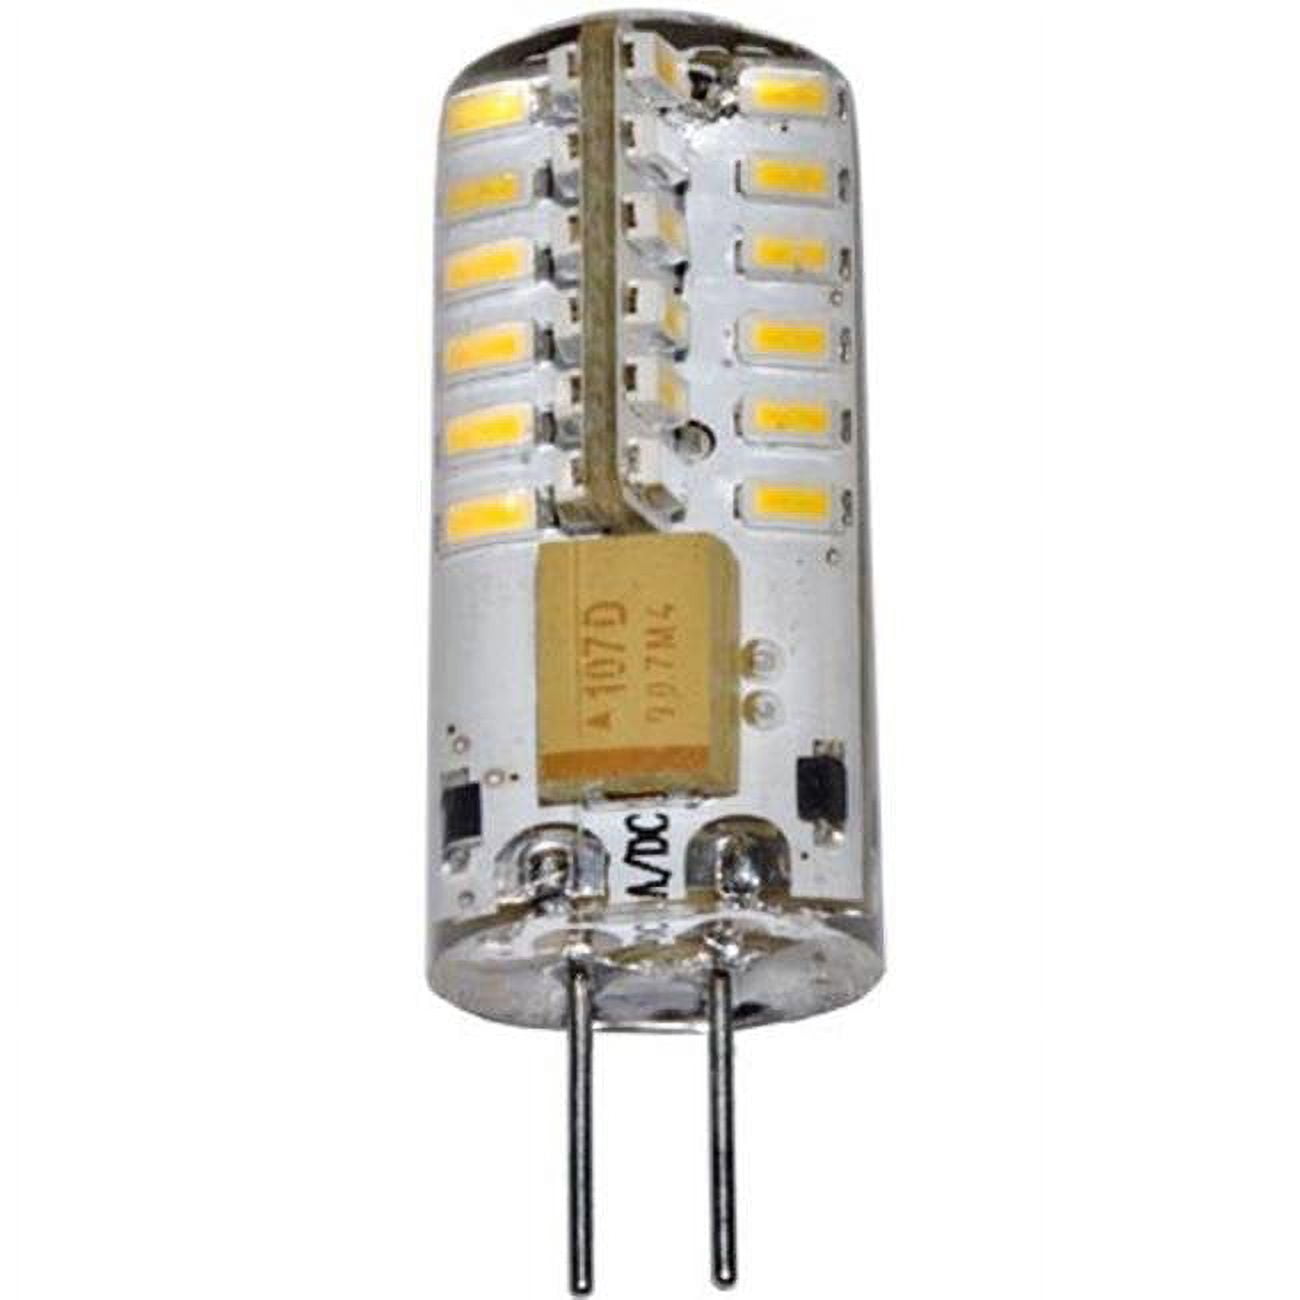 Picture of Dabmar Lighting DL-LED-G4S-2.5-30K Bi-Pin Silicone Lamp - Round 2.5W 48 LEDs 12V, White - 1.46 x 0.46 x 0.46 in.